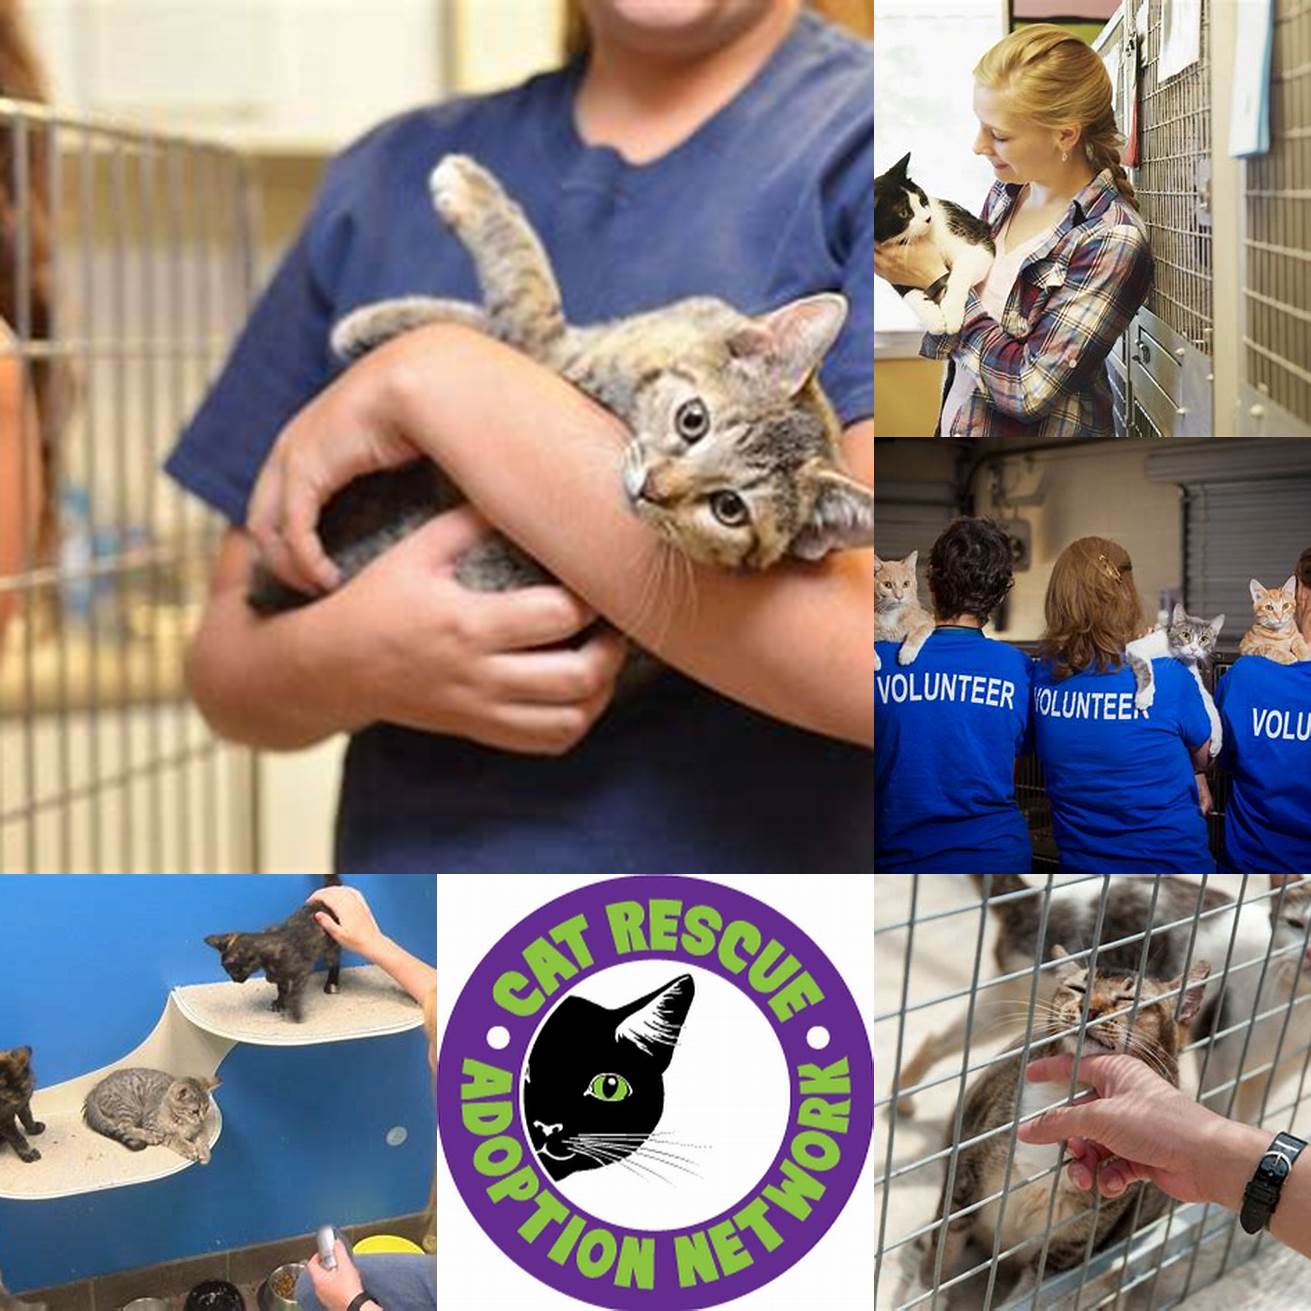 Visit local shelters and rescue organizations